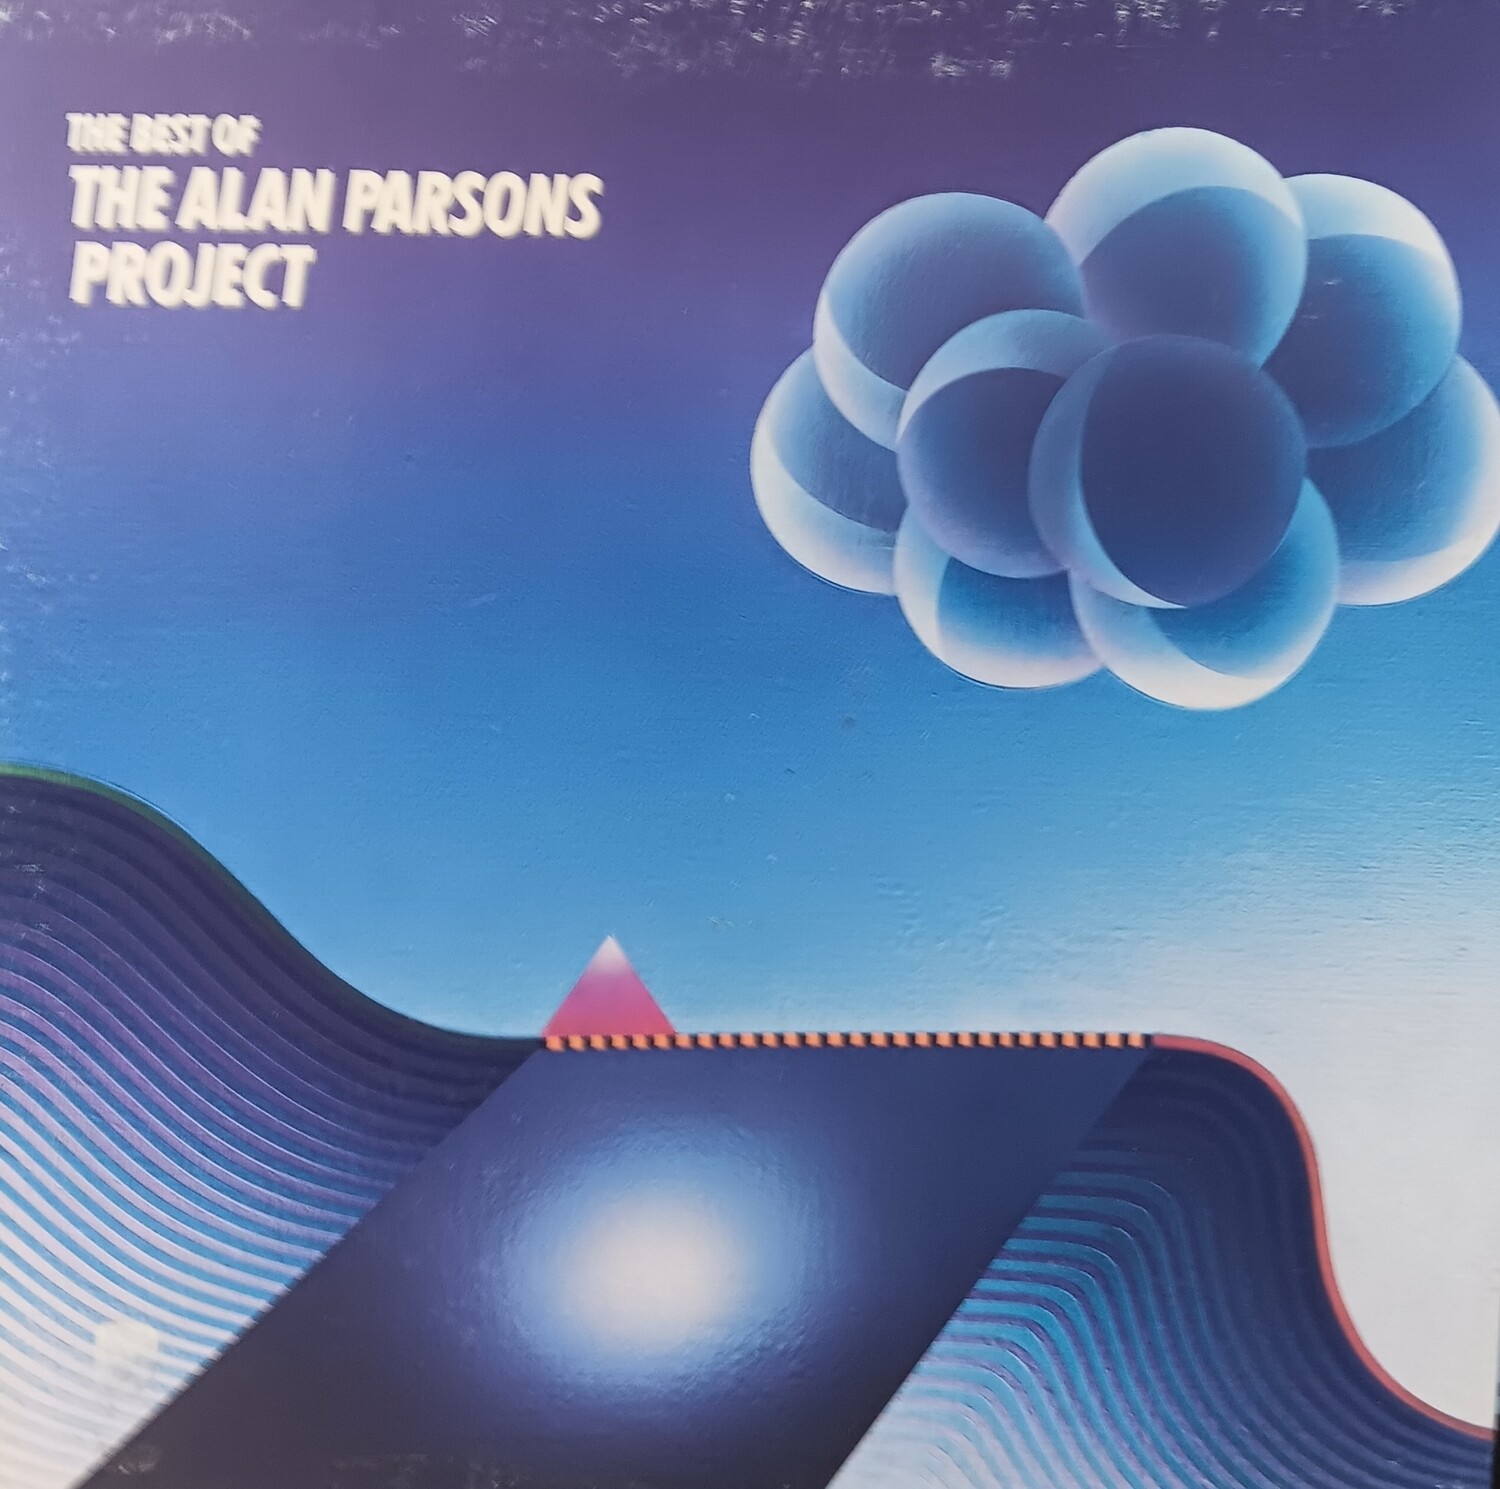 THE ALAN PARSONS PROJECT - Best of